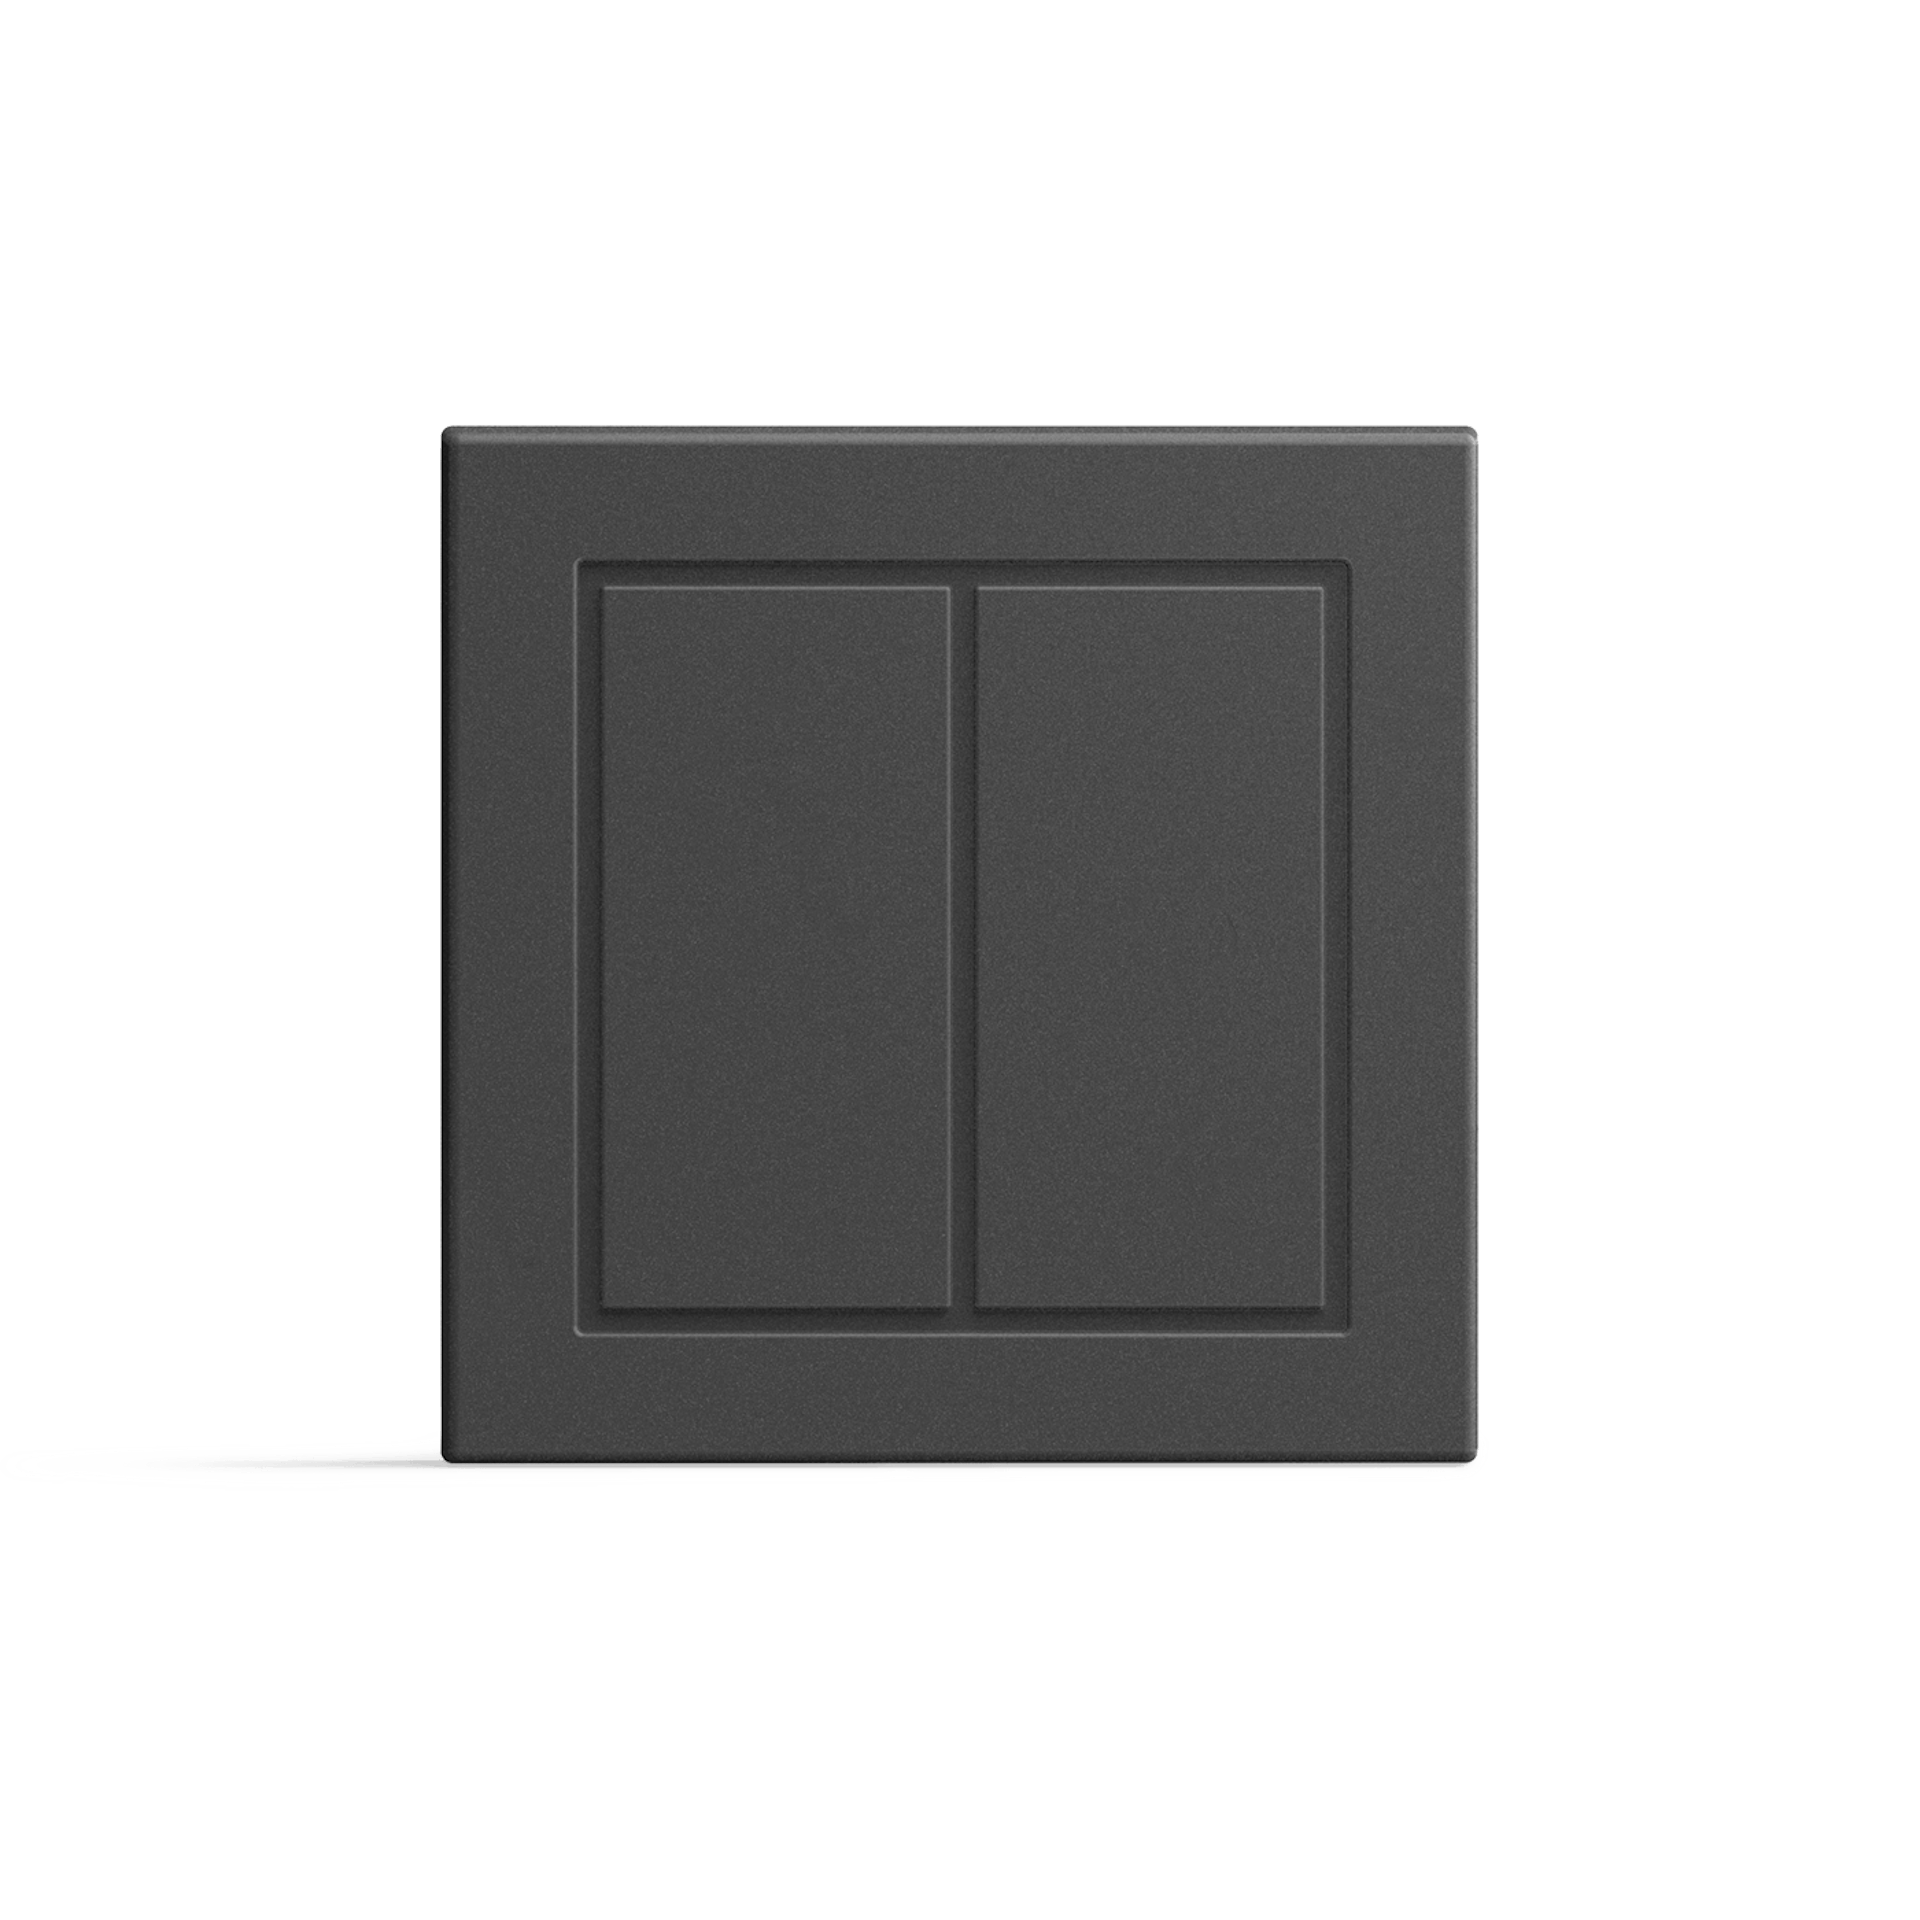 Senic – Outdoor Switch